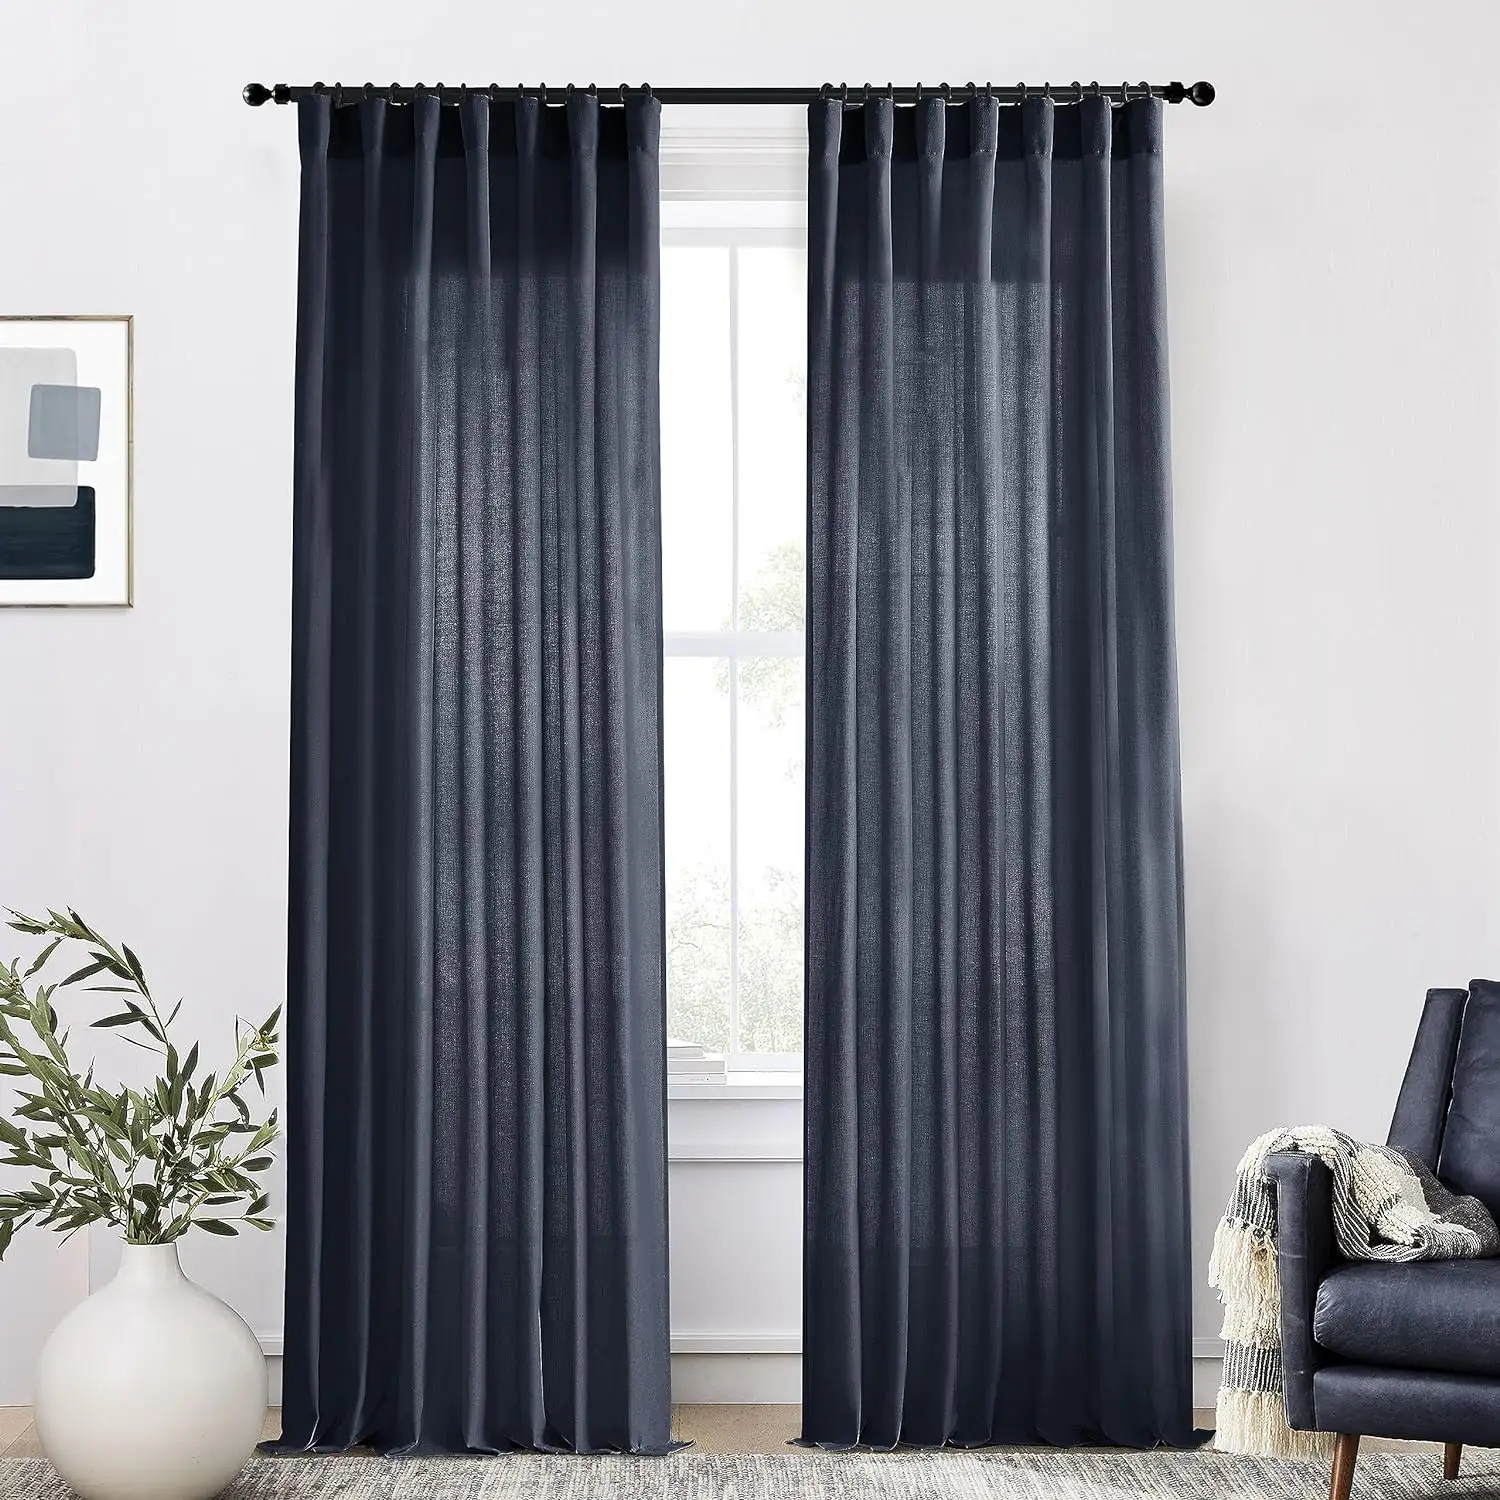 Rideaux de lin multifonctionnels-Back Tab track clip rings rod povket Flax Weave Sheer Extra Long Curtain for Living Room Bedroom